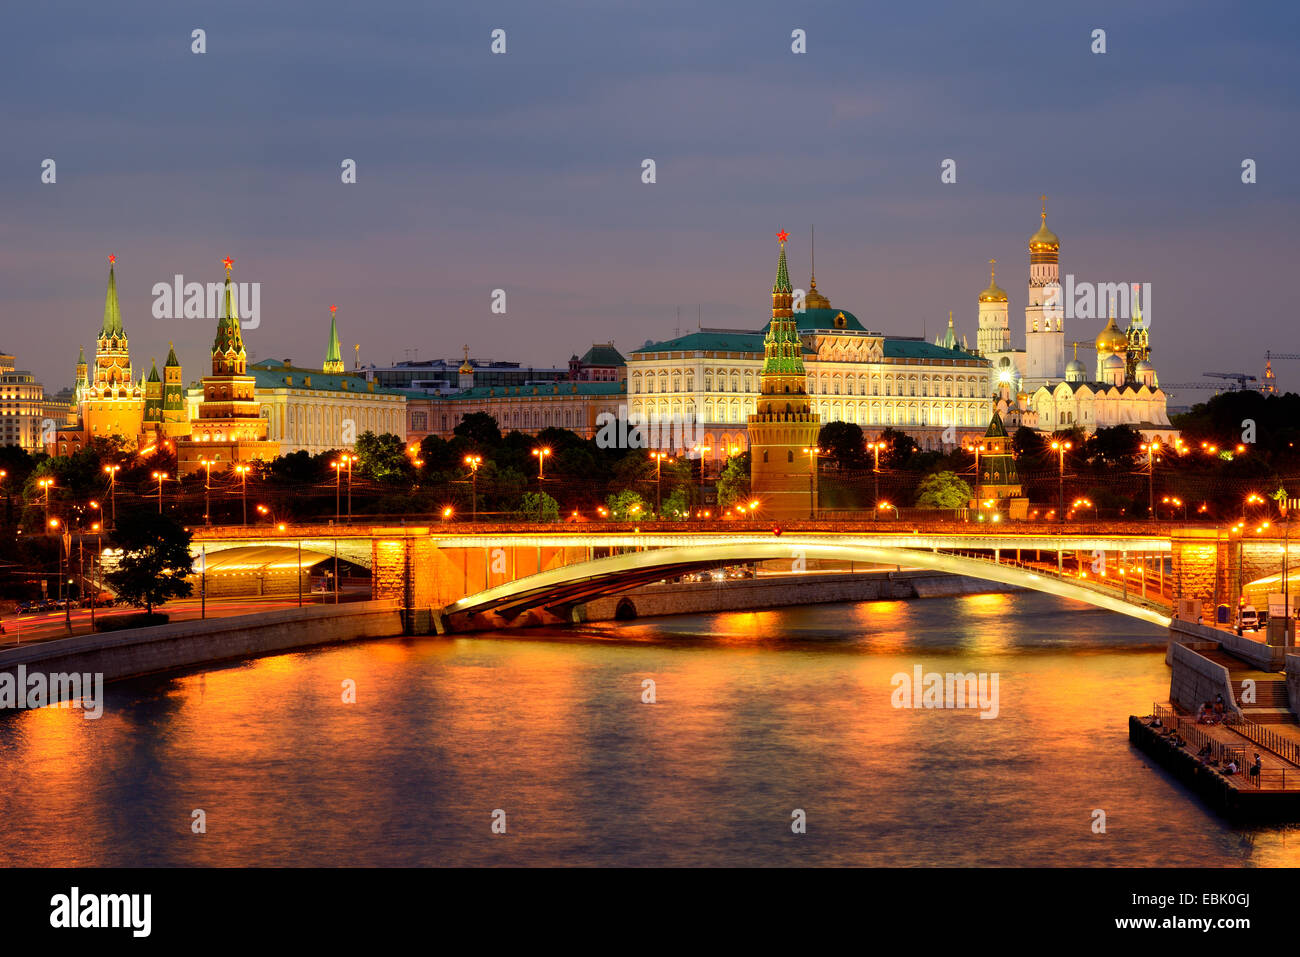 View of Kremlin towers and the Bolshoy Kamenny bridge over Moskva river at night, Moscow, Russia Stock Photo